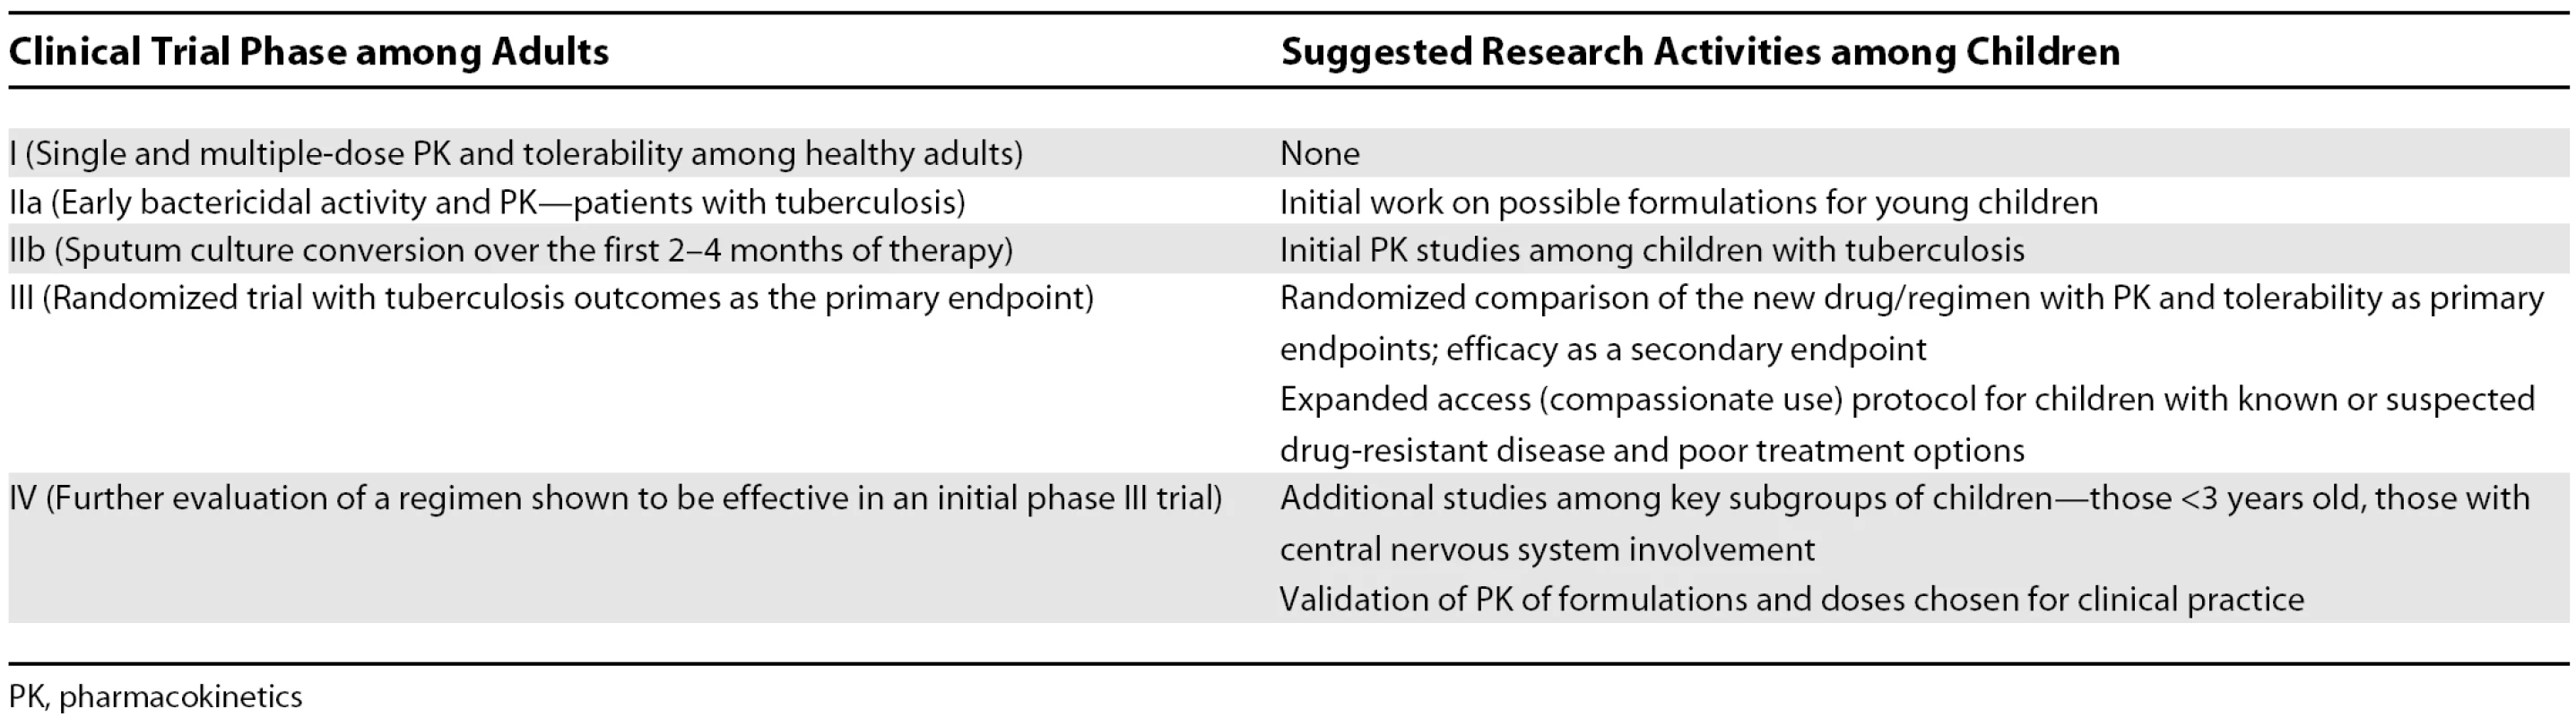 Suggested Types of Research Activity among Children by the Stage of Clinical Trial Efforts among Adults for a New Antituberculosis Drug/Regimen